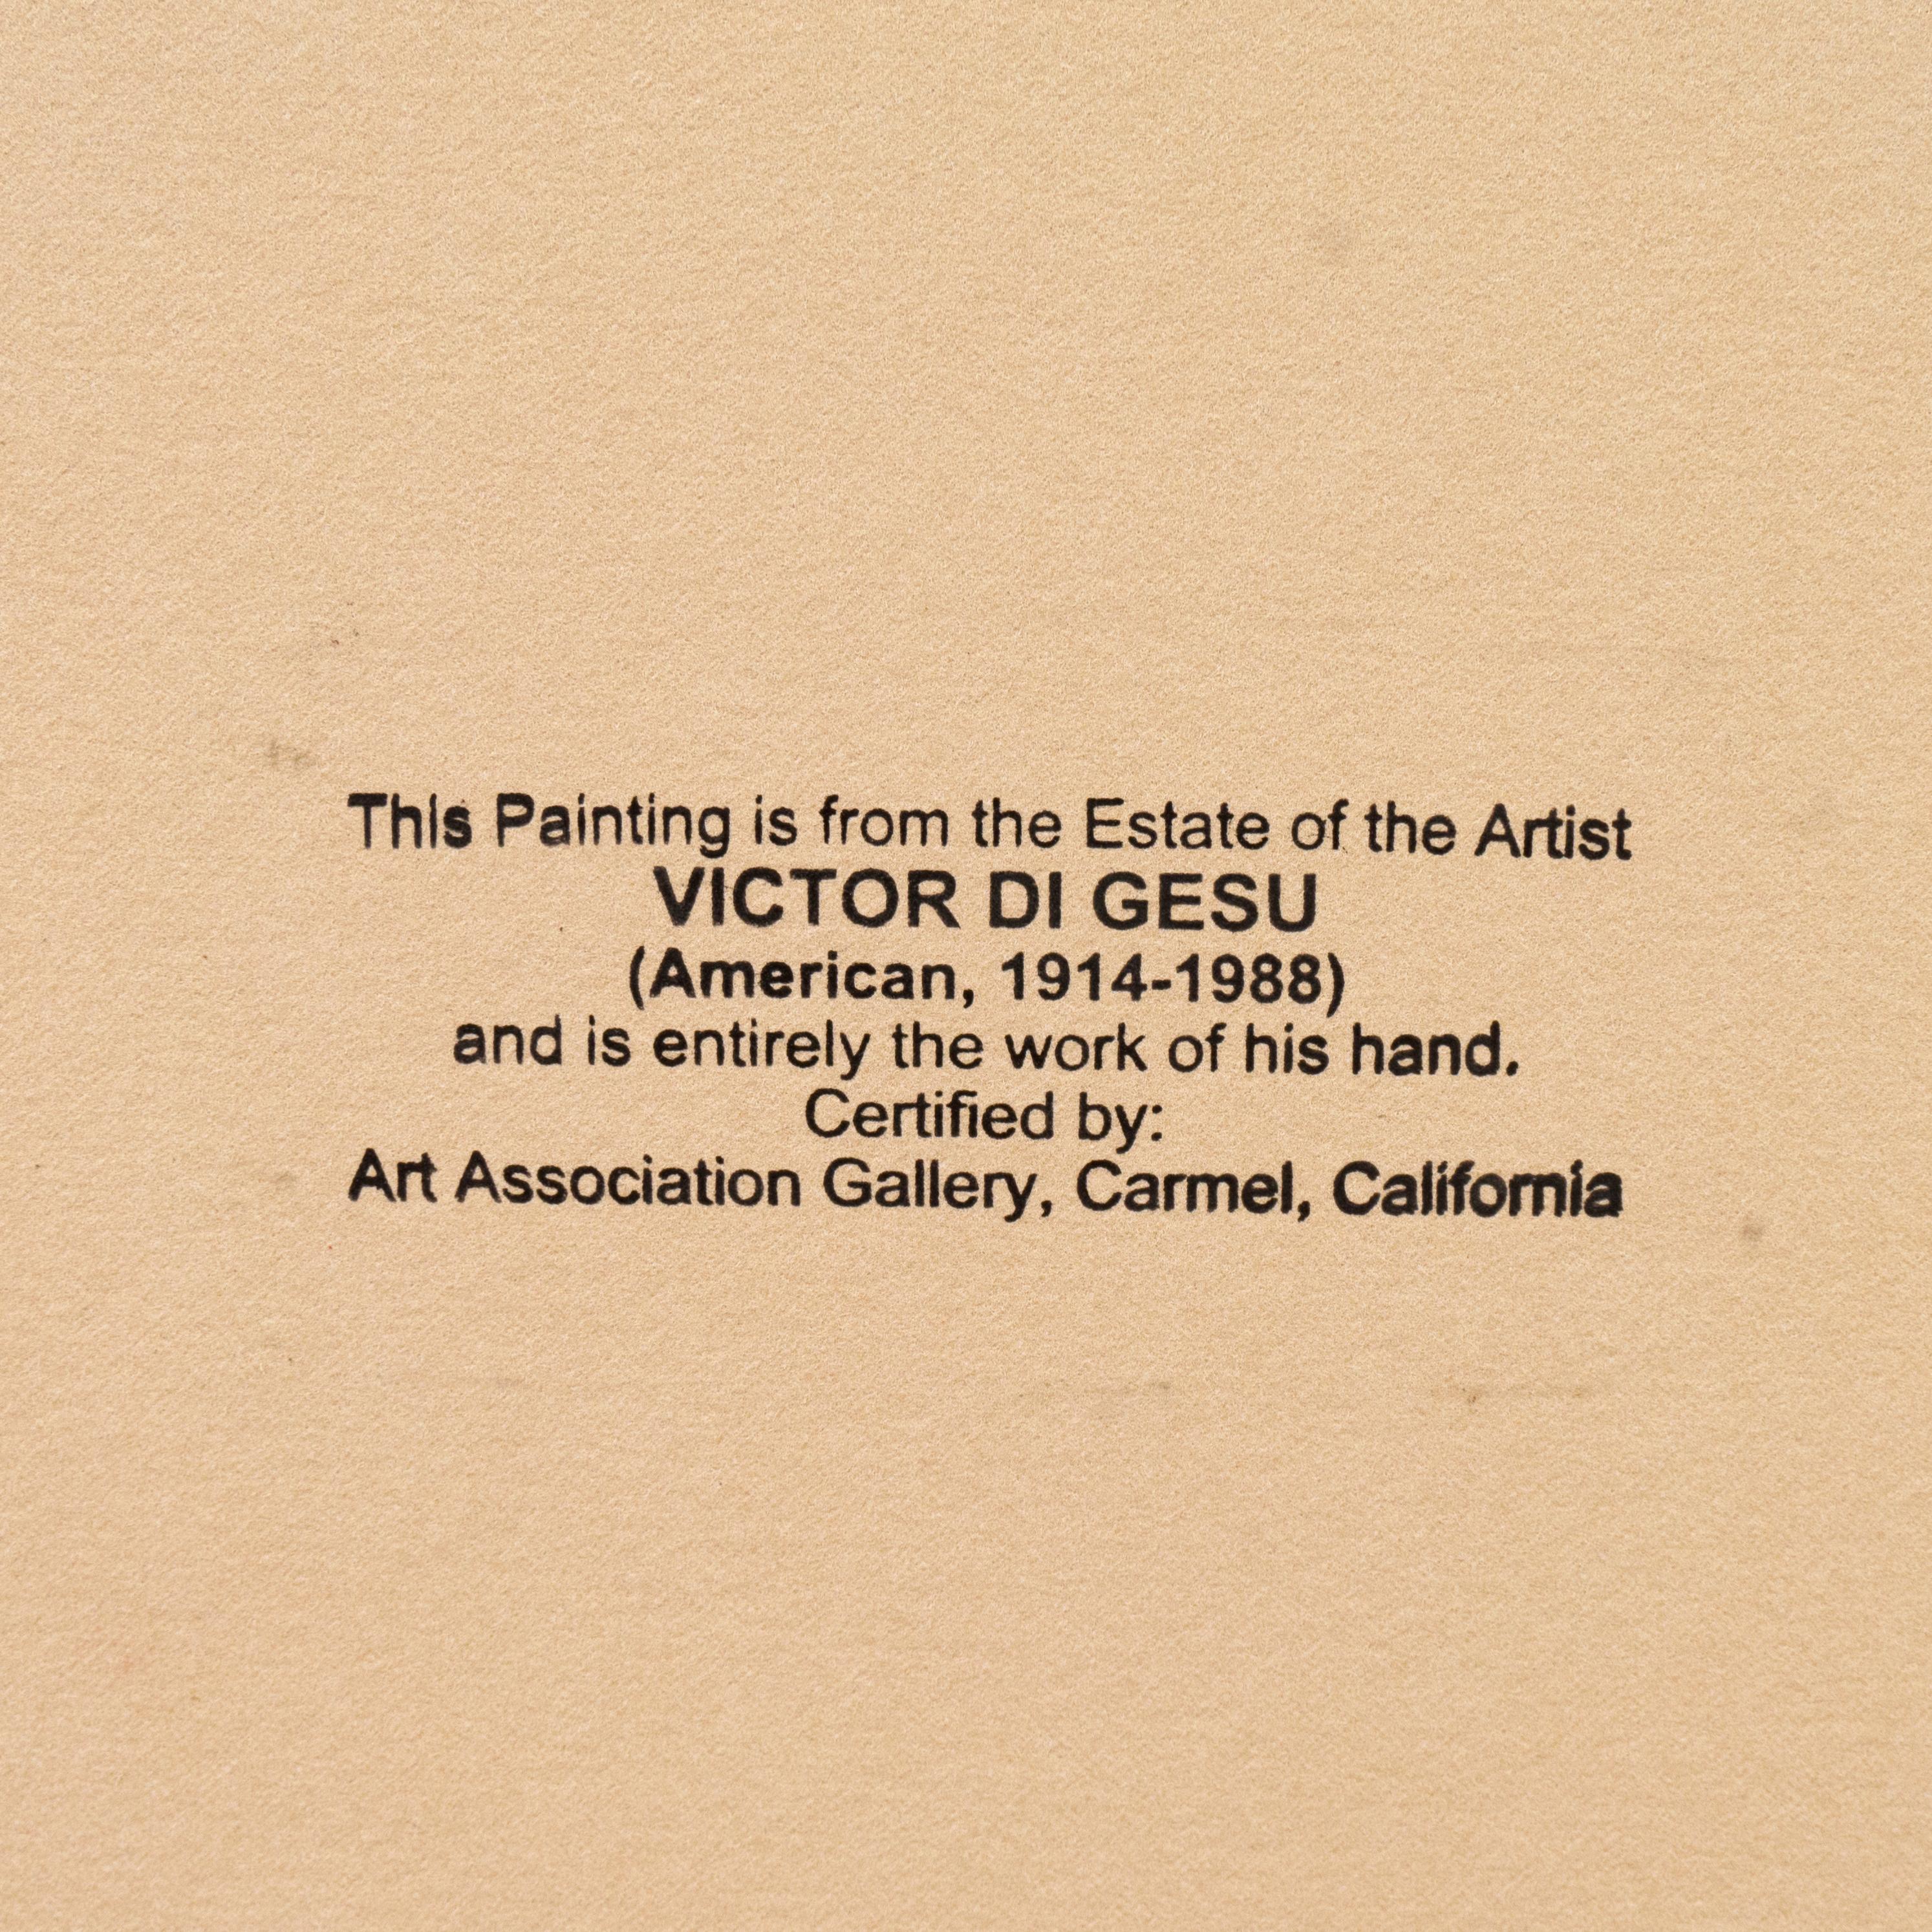 Painted circa 1955 by Victor Di Gesu (American, 1914-1988) and stamped verso with Victor di Gesu estate stamp.

Winner of the Prix Othon Friesz, Victor di Gesu first attended the Los Angeles Art Center and the Chouinard Art School before moving to